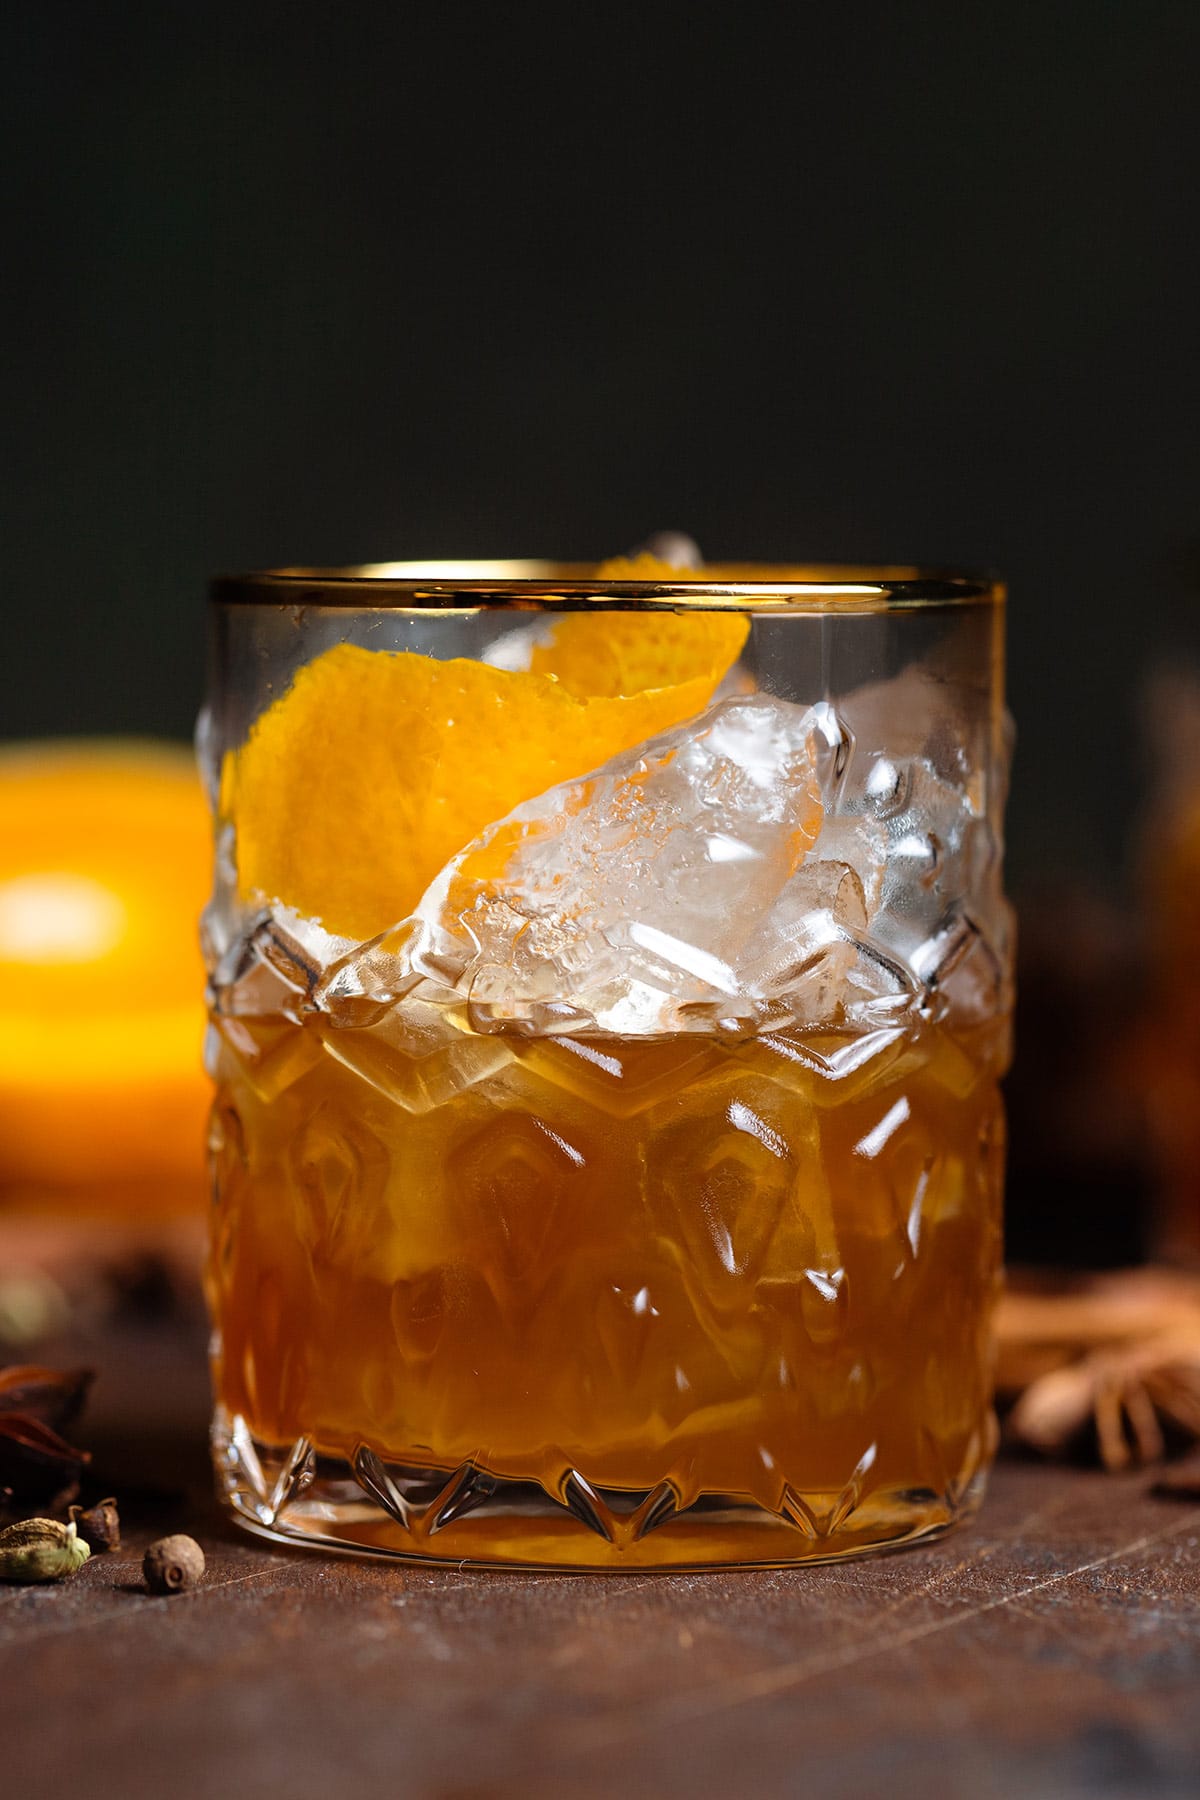 Old fashioned cocktail in a gold-rimmed glass with ice, orange zest, and star anise.